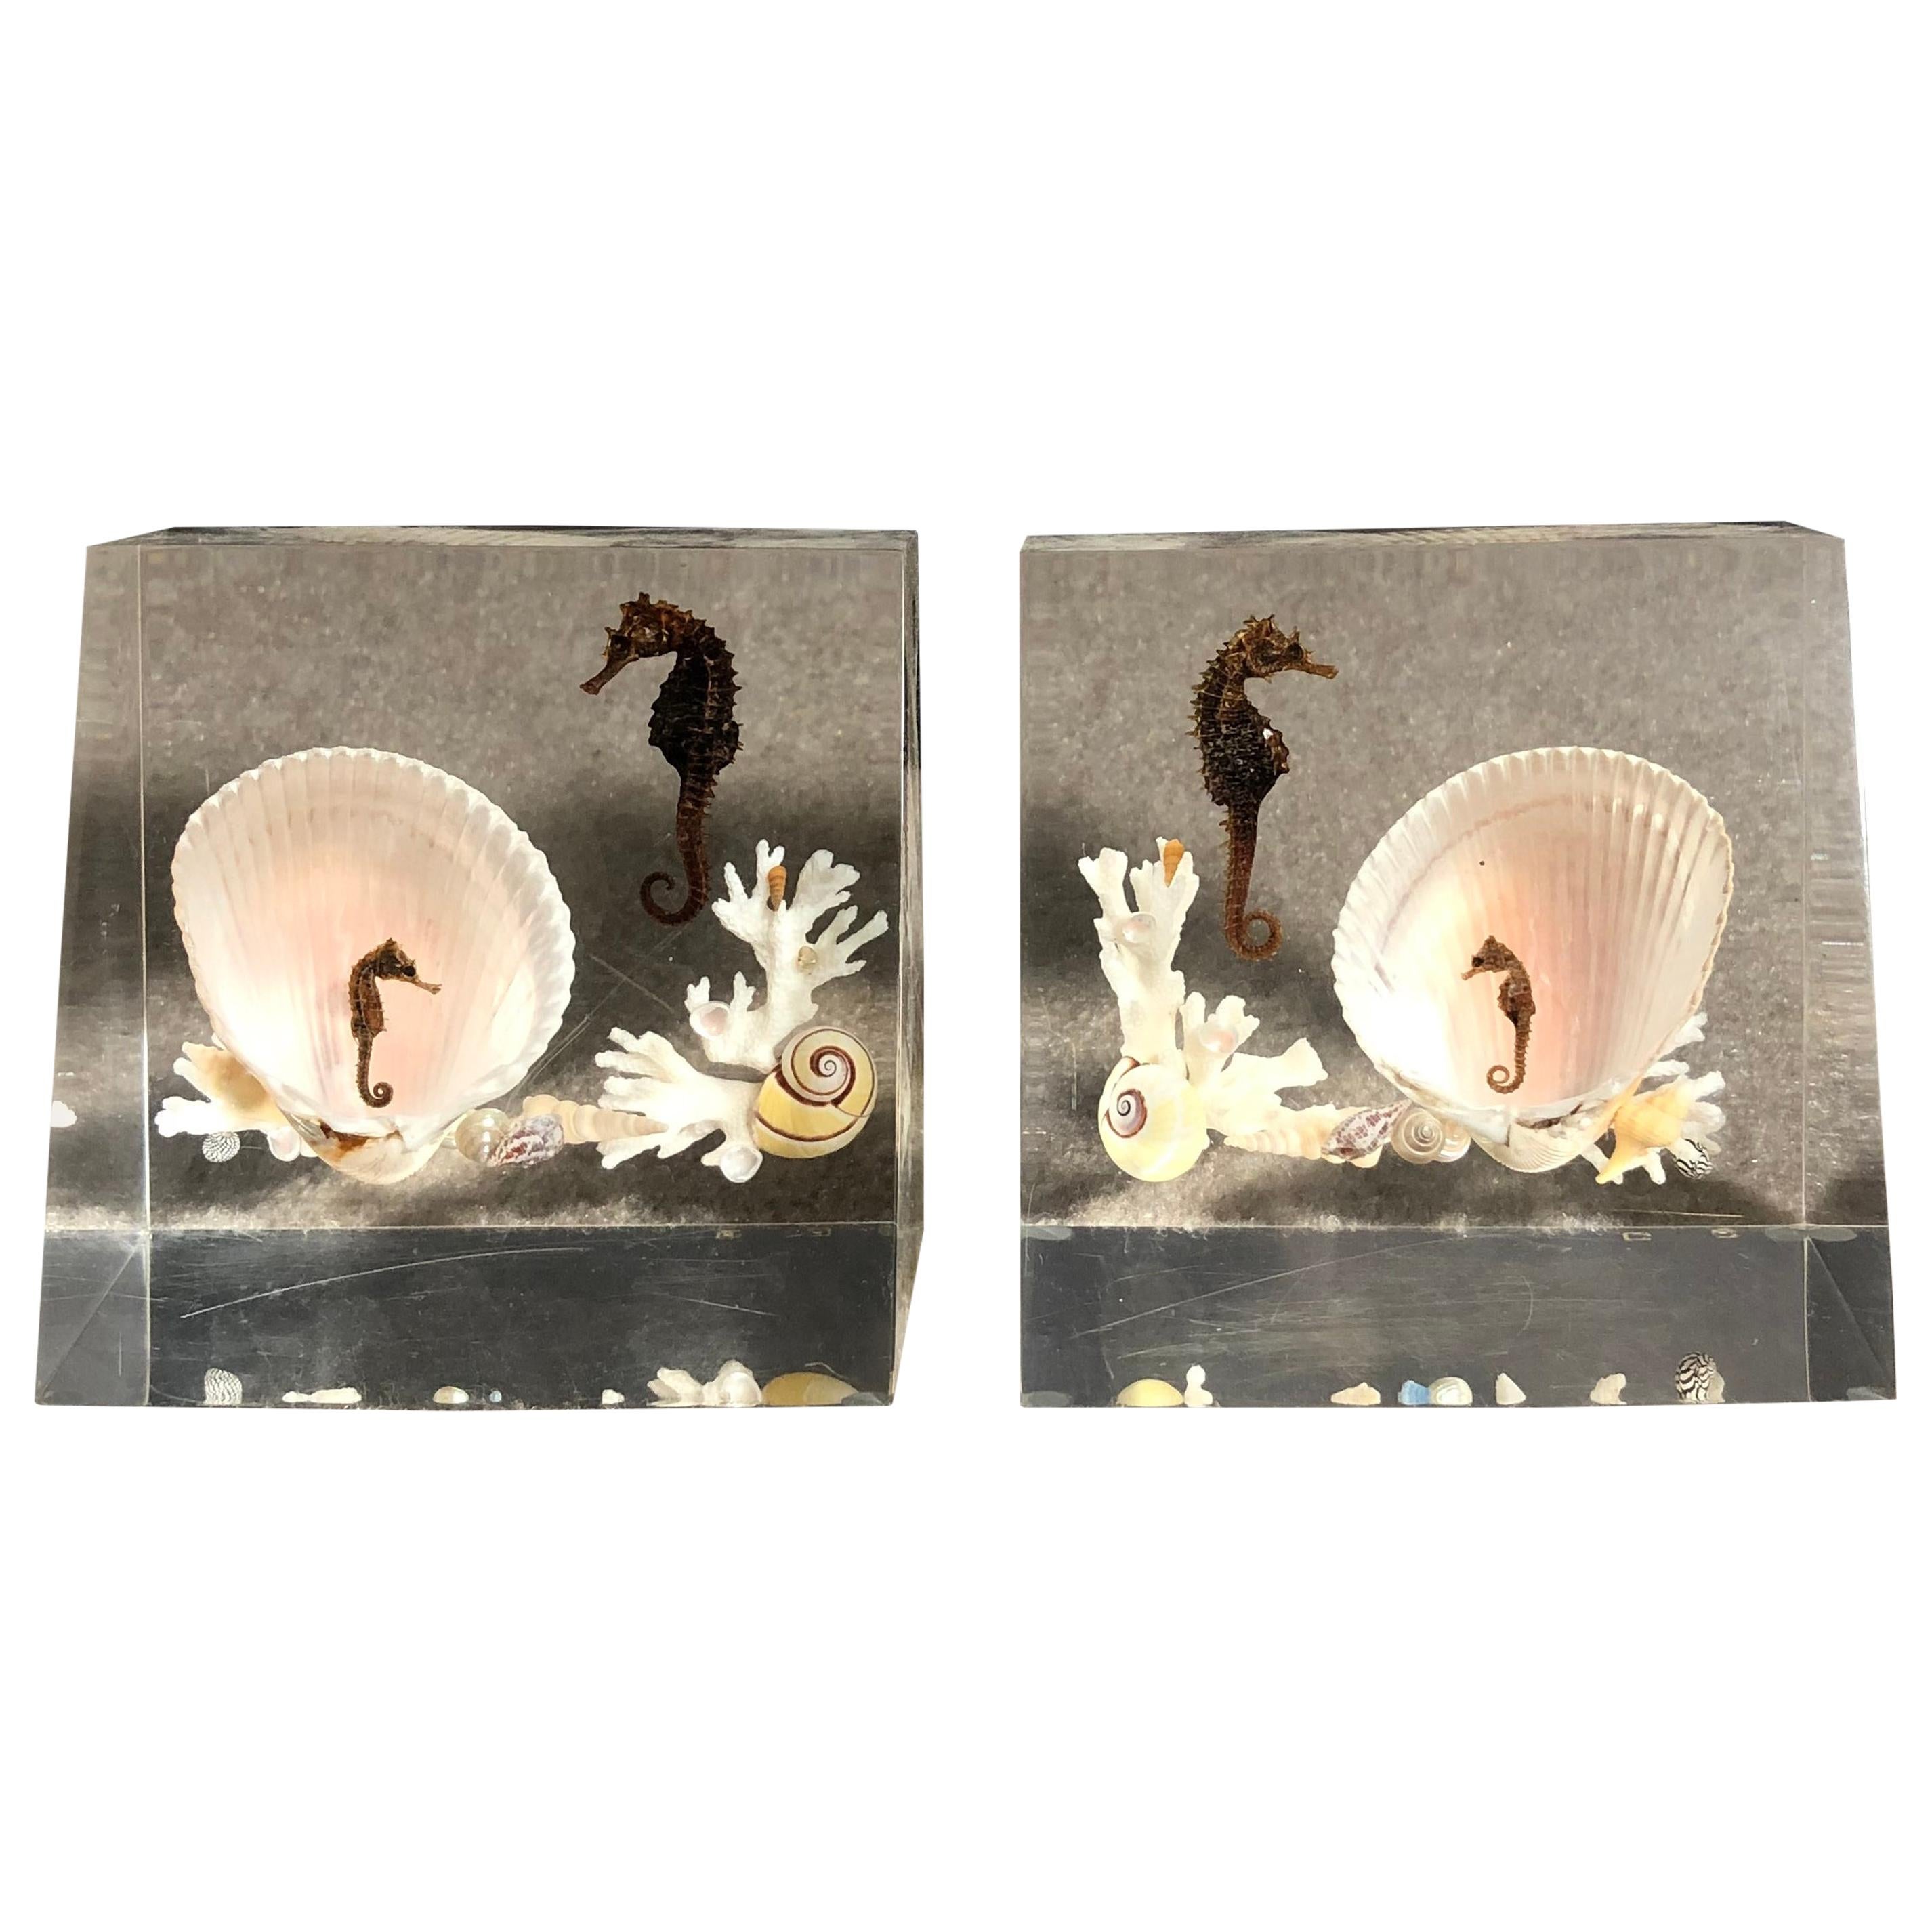 Lucite and Sea Shell Bookends with Seahorse